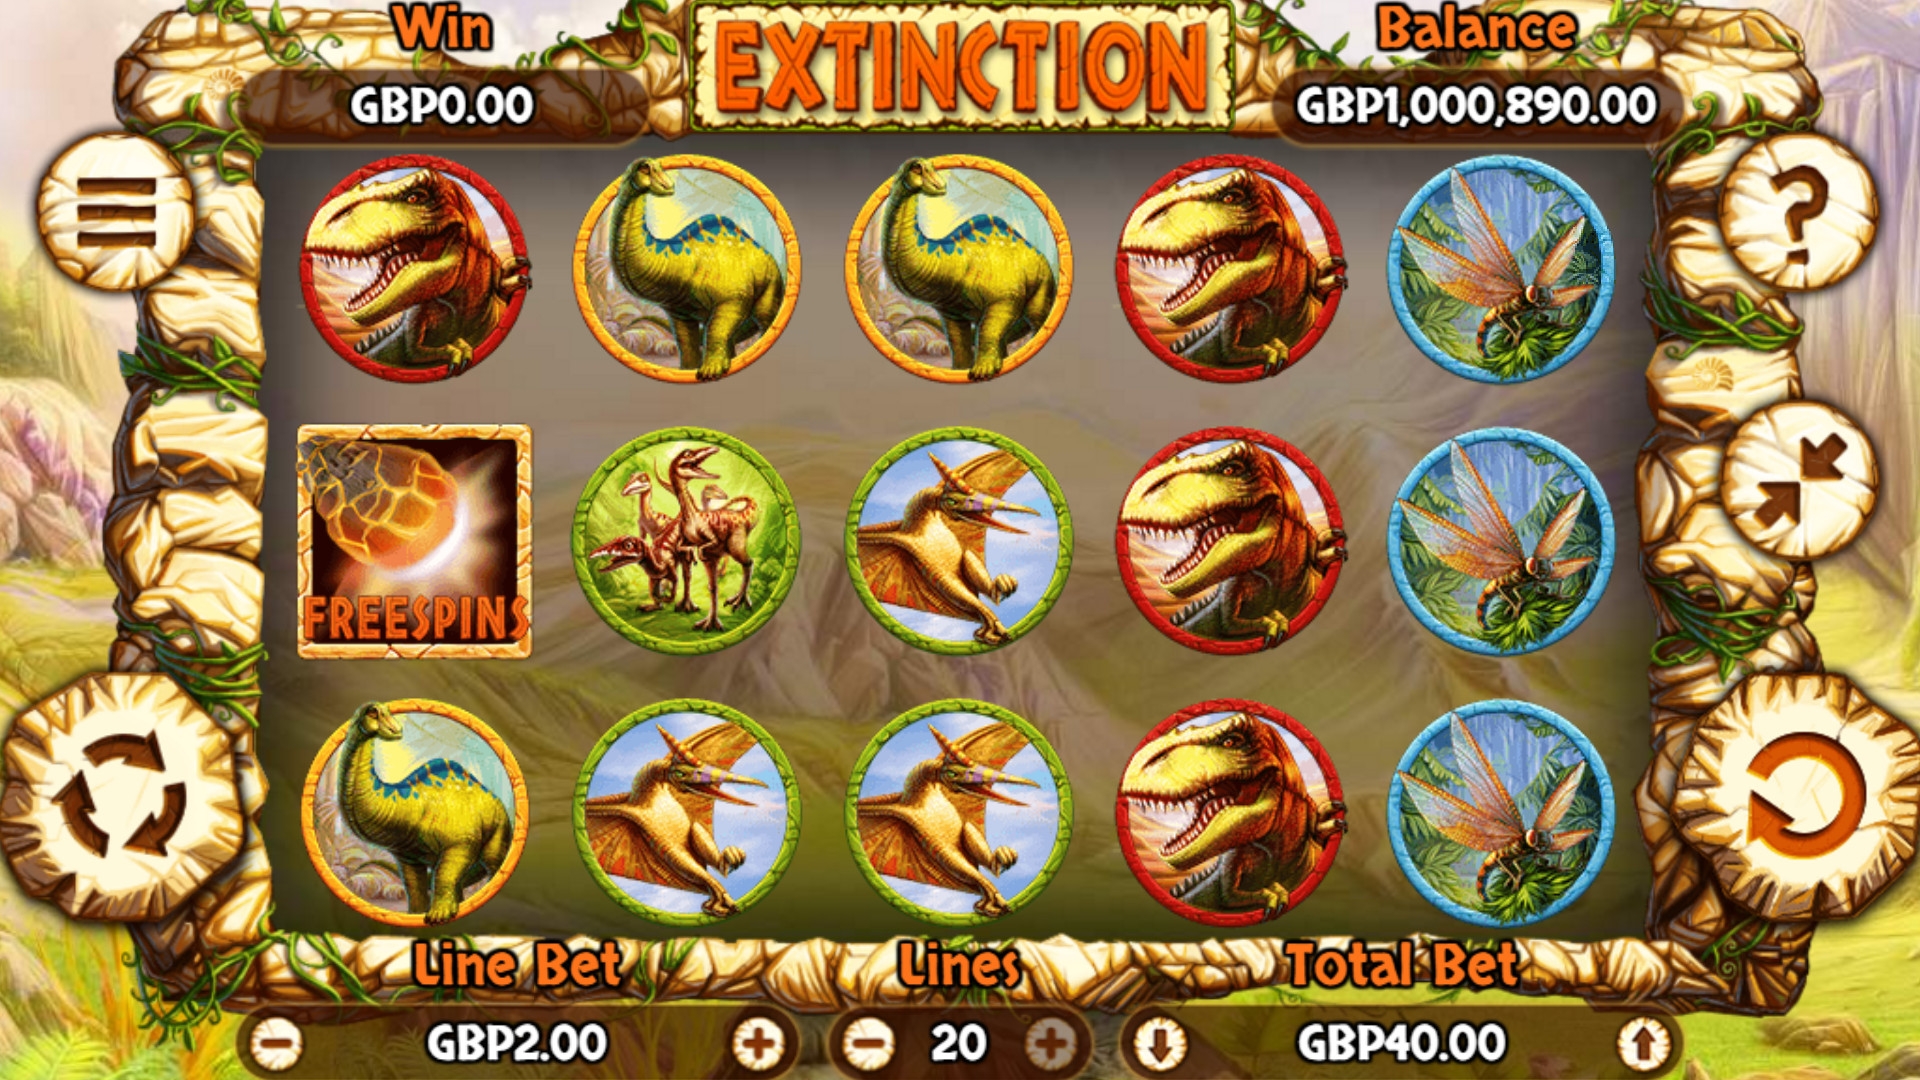 Extinction (Extinction) from category Slots